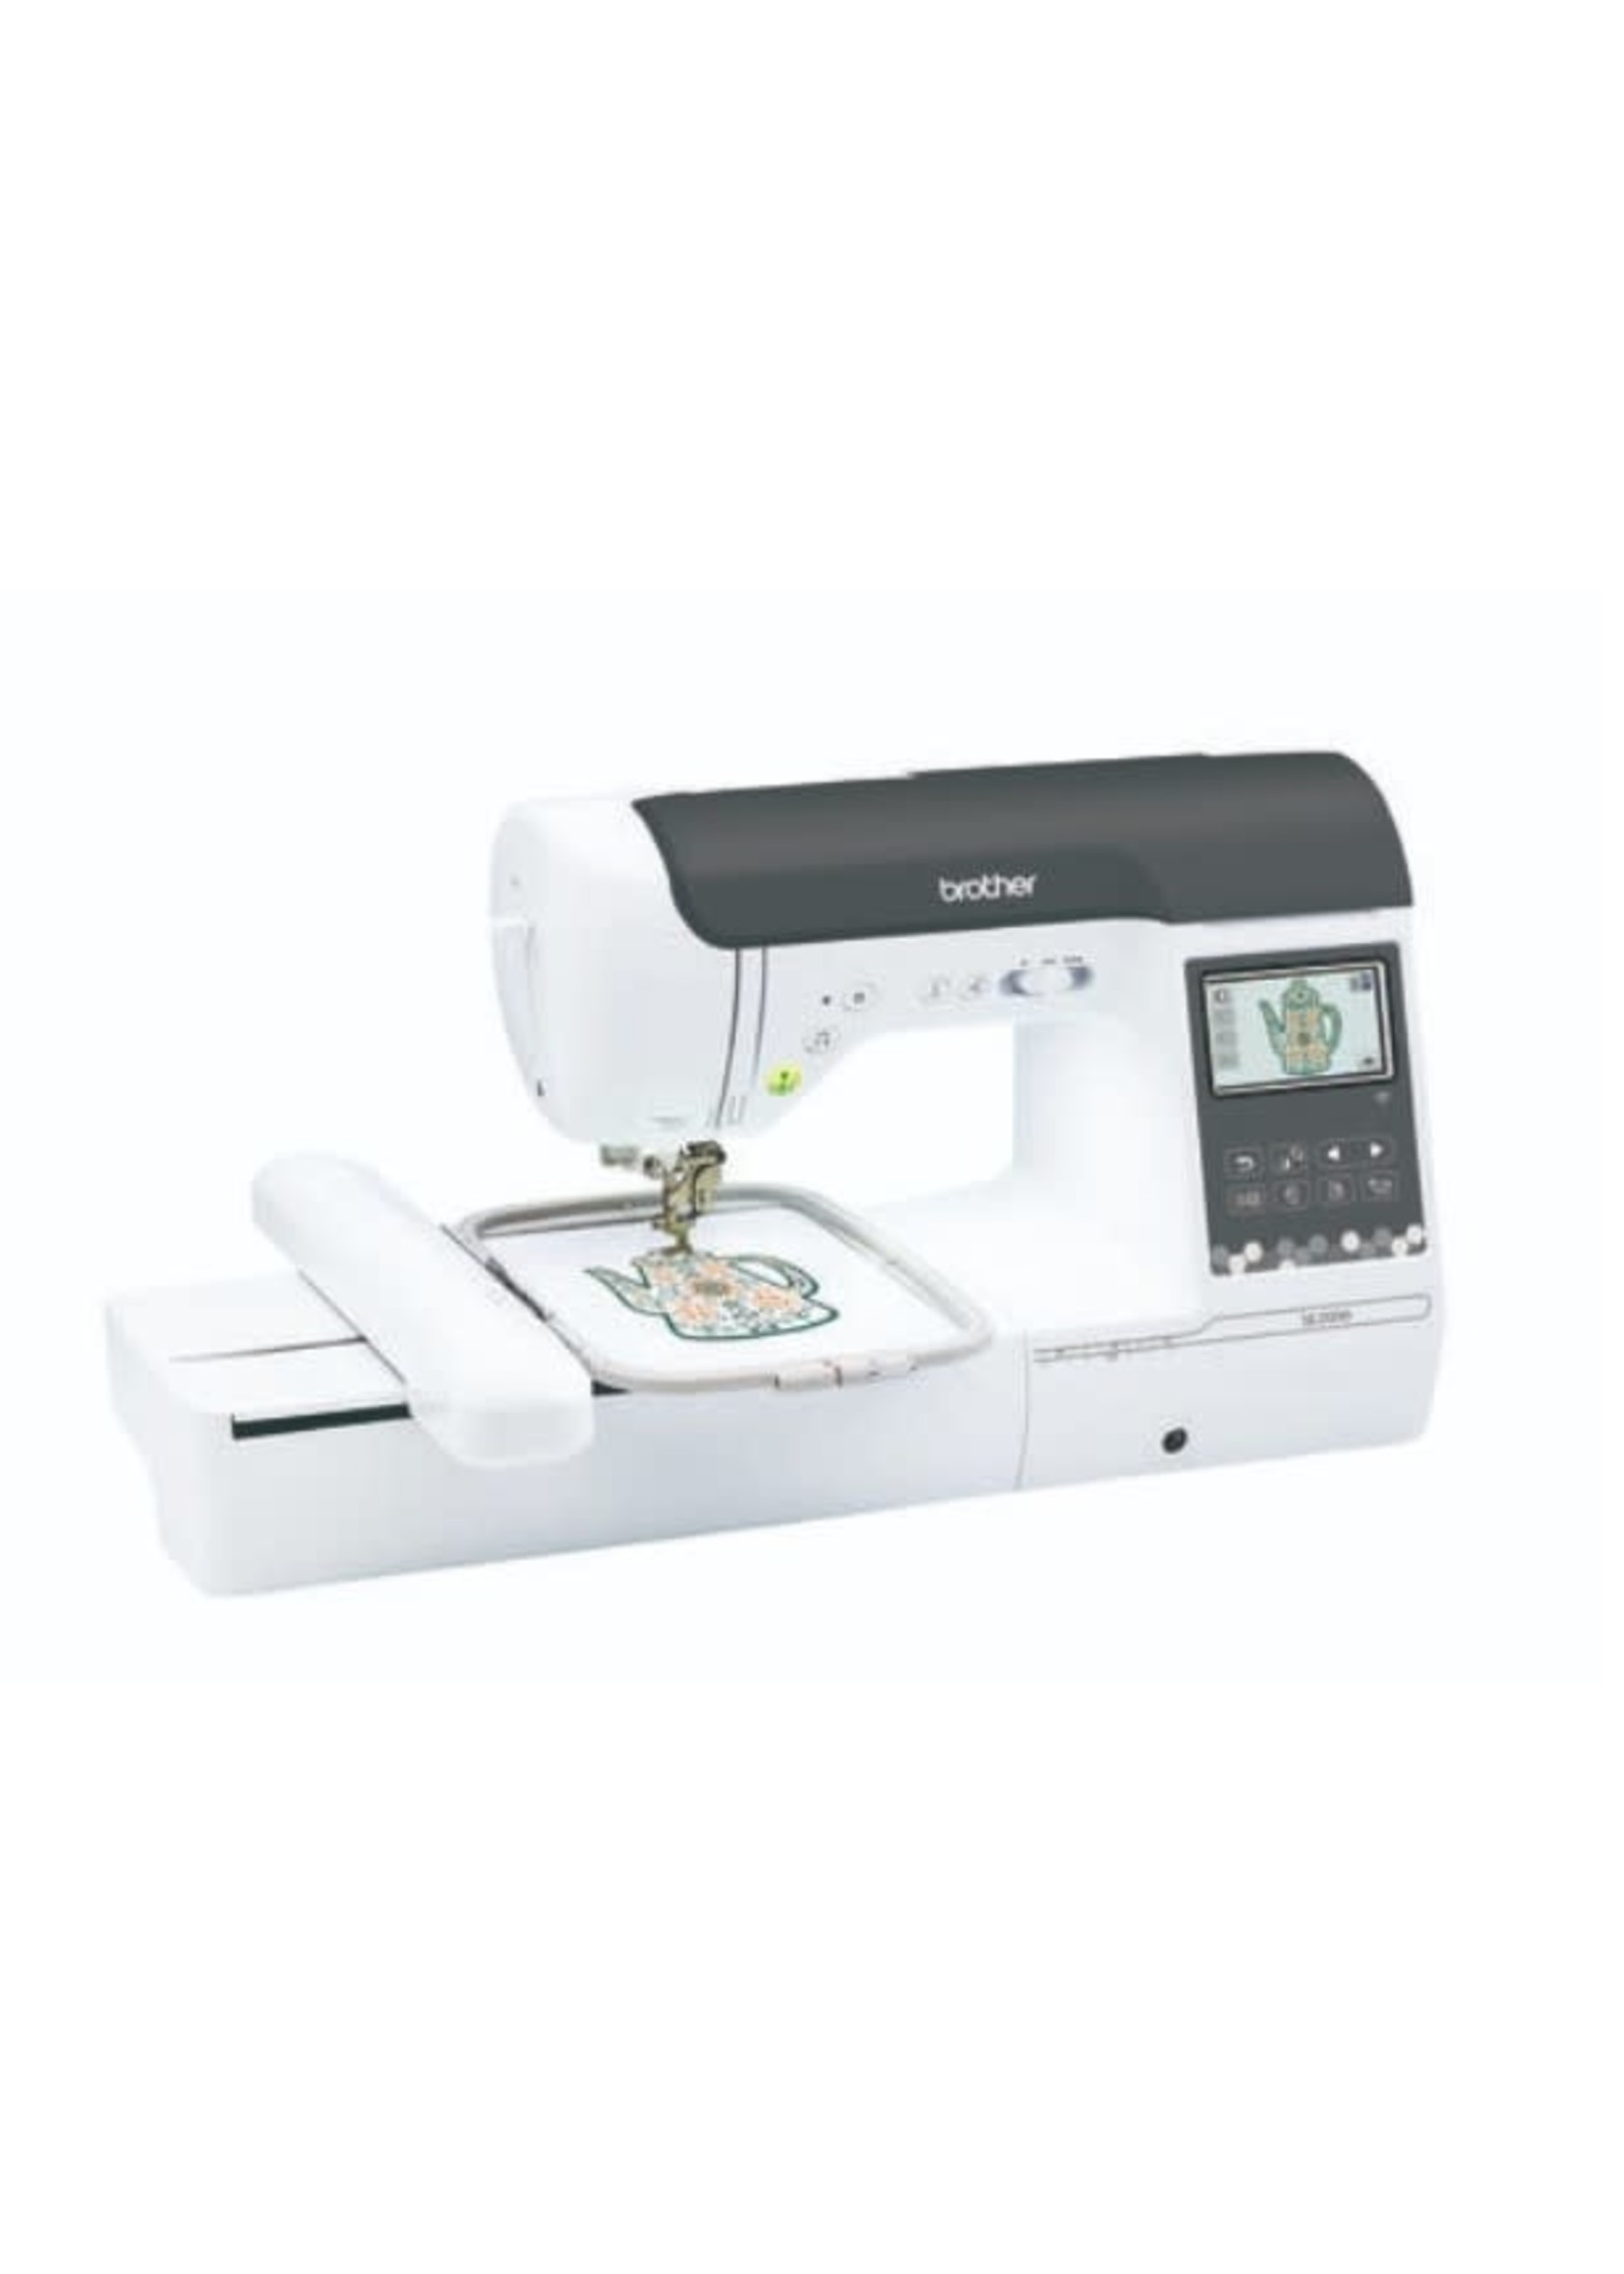 Brother SE2000 sewing and embroidery machine